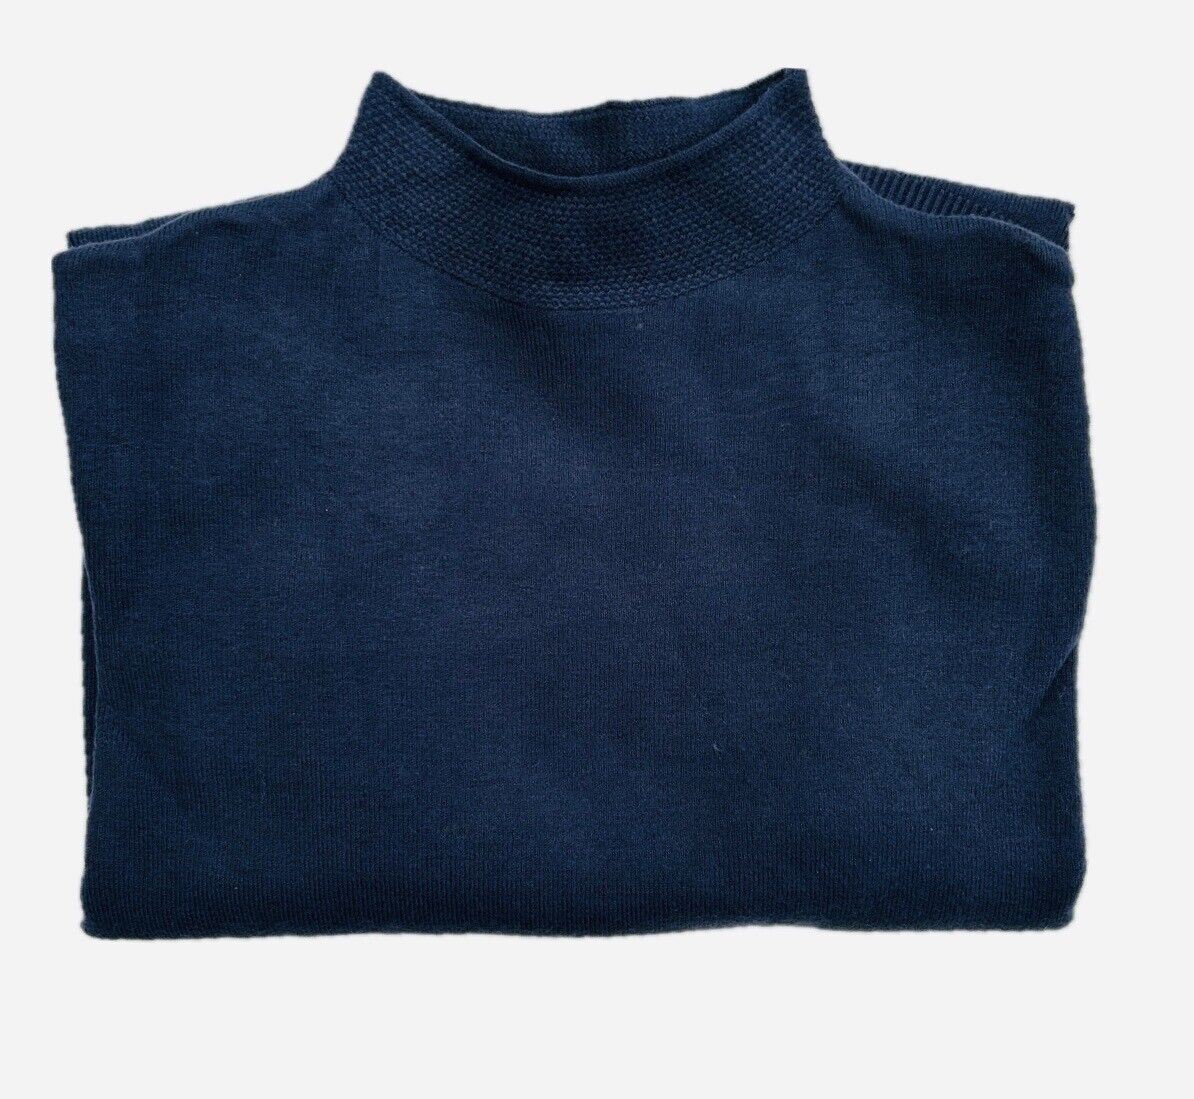 Ex Famous Store Brand Ladies Jumper Funnel Neck Blue Black Lilac Beige Navy Cosy Soft Sweater